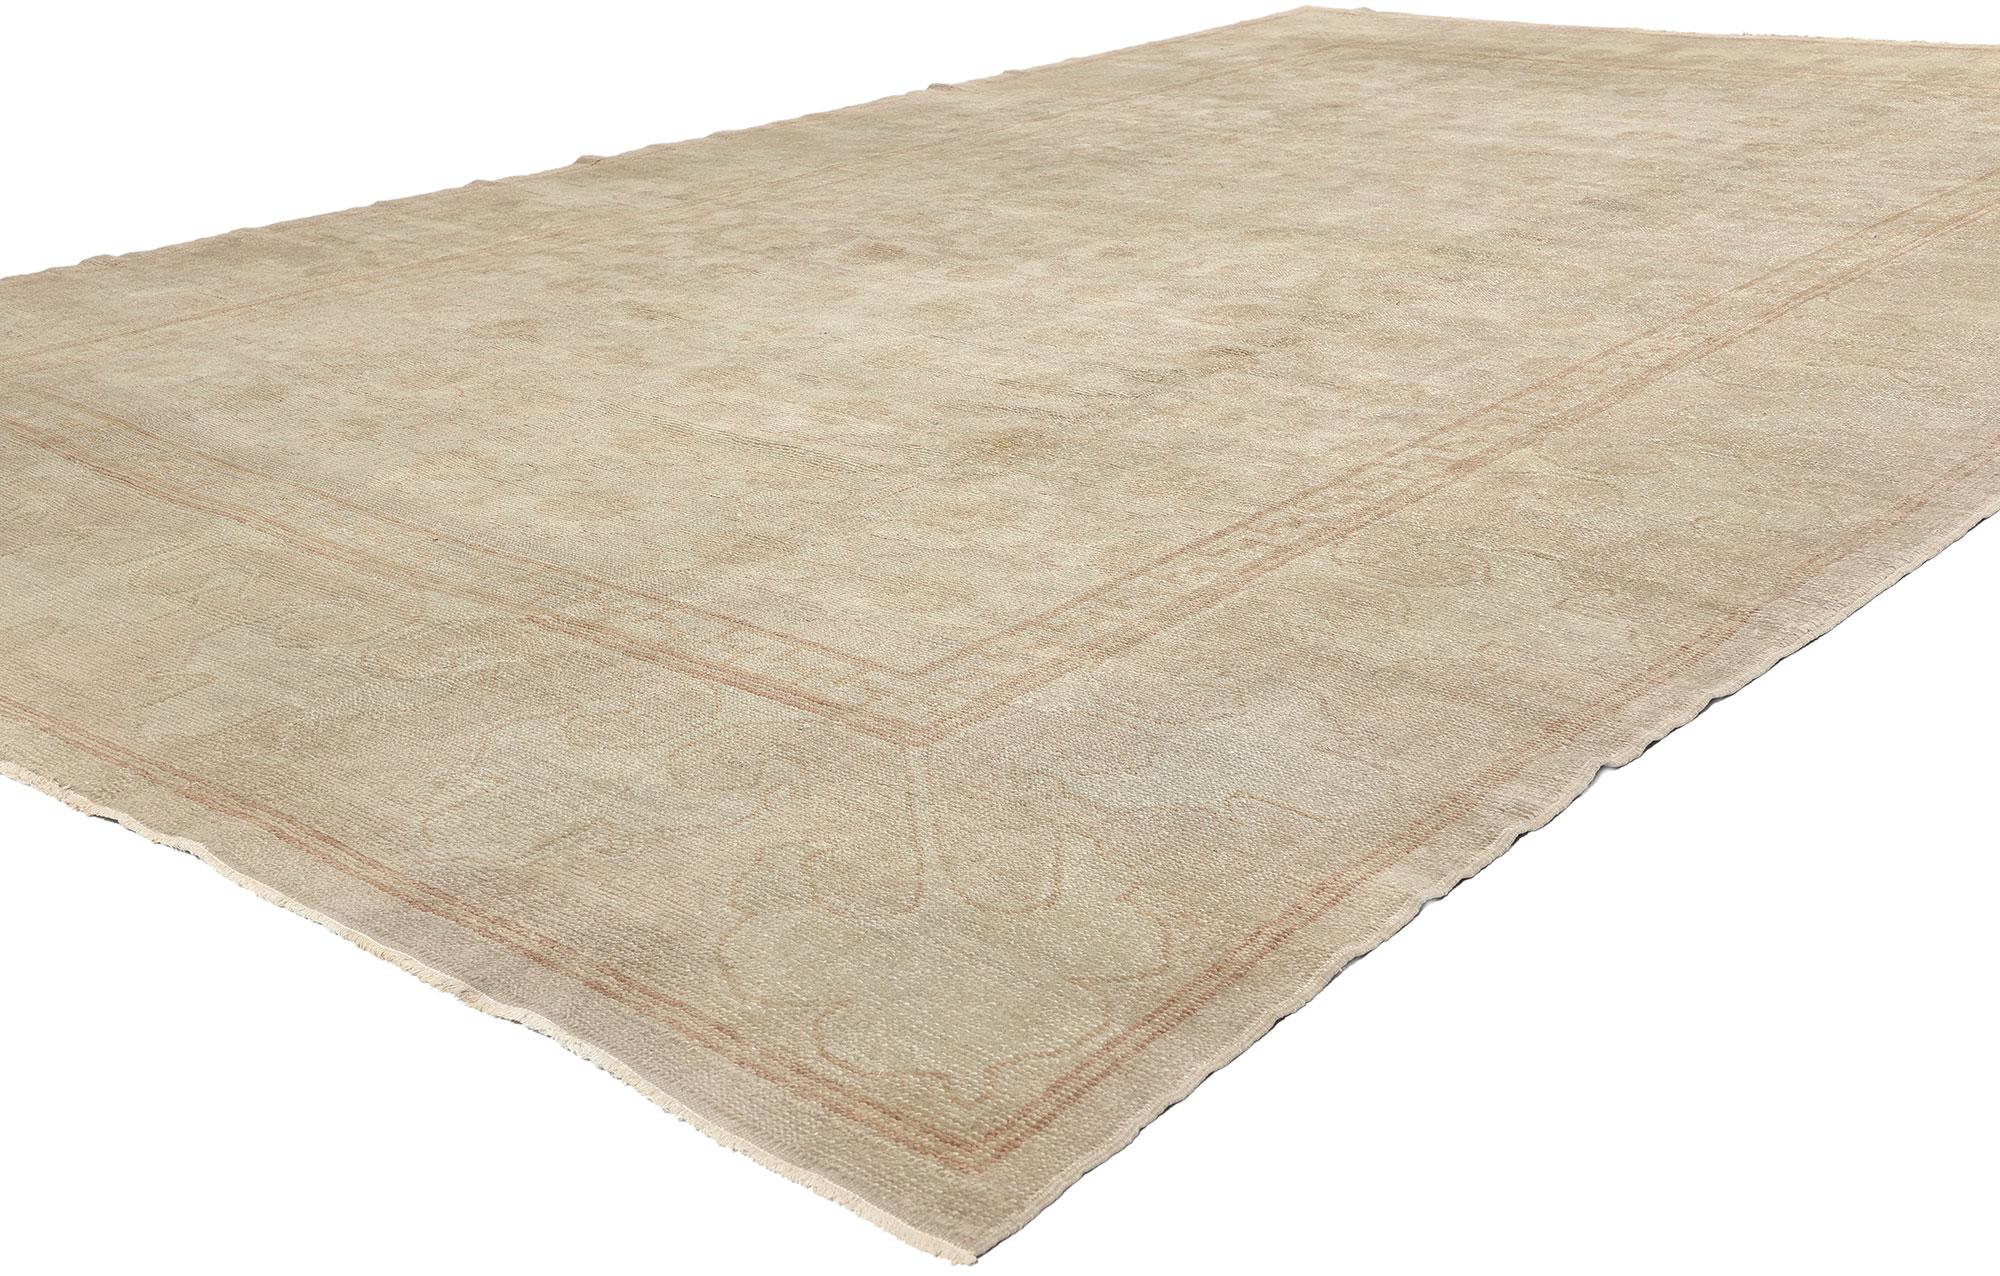 50866 Distressed Vintage Muted Turkish Oushak Rug, 09'07 x 14'10. Immersed in centuries-old tradition and meticulously crafted by skilled artisans, antique-washed Turkish Oushak rugs hail from the revered Oushak region, where they undergo a special